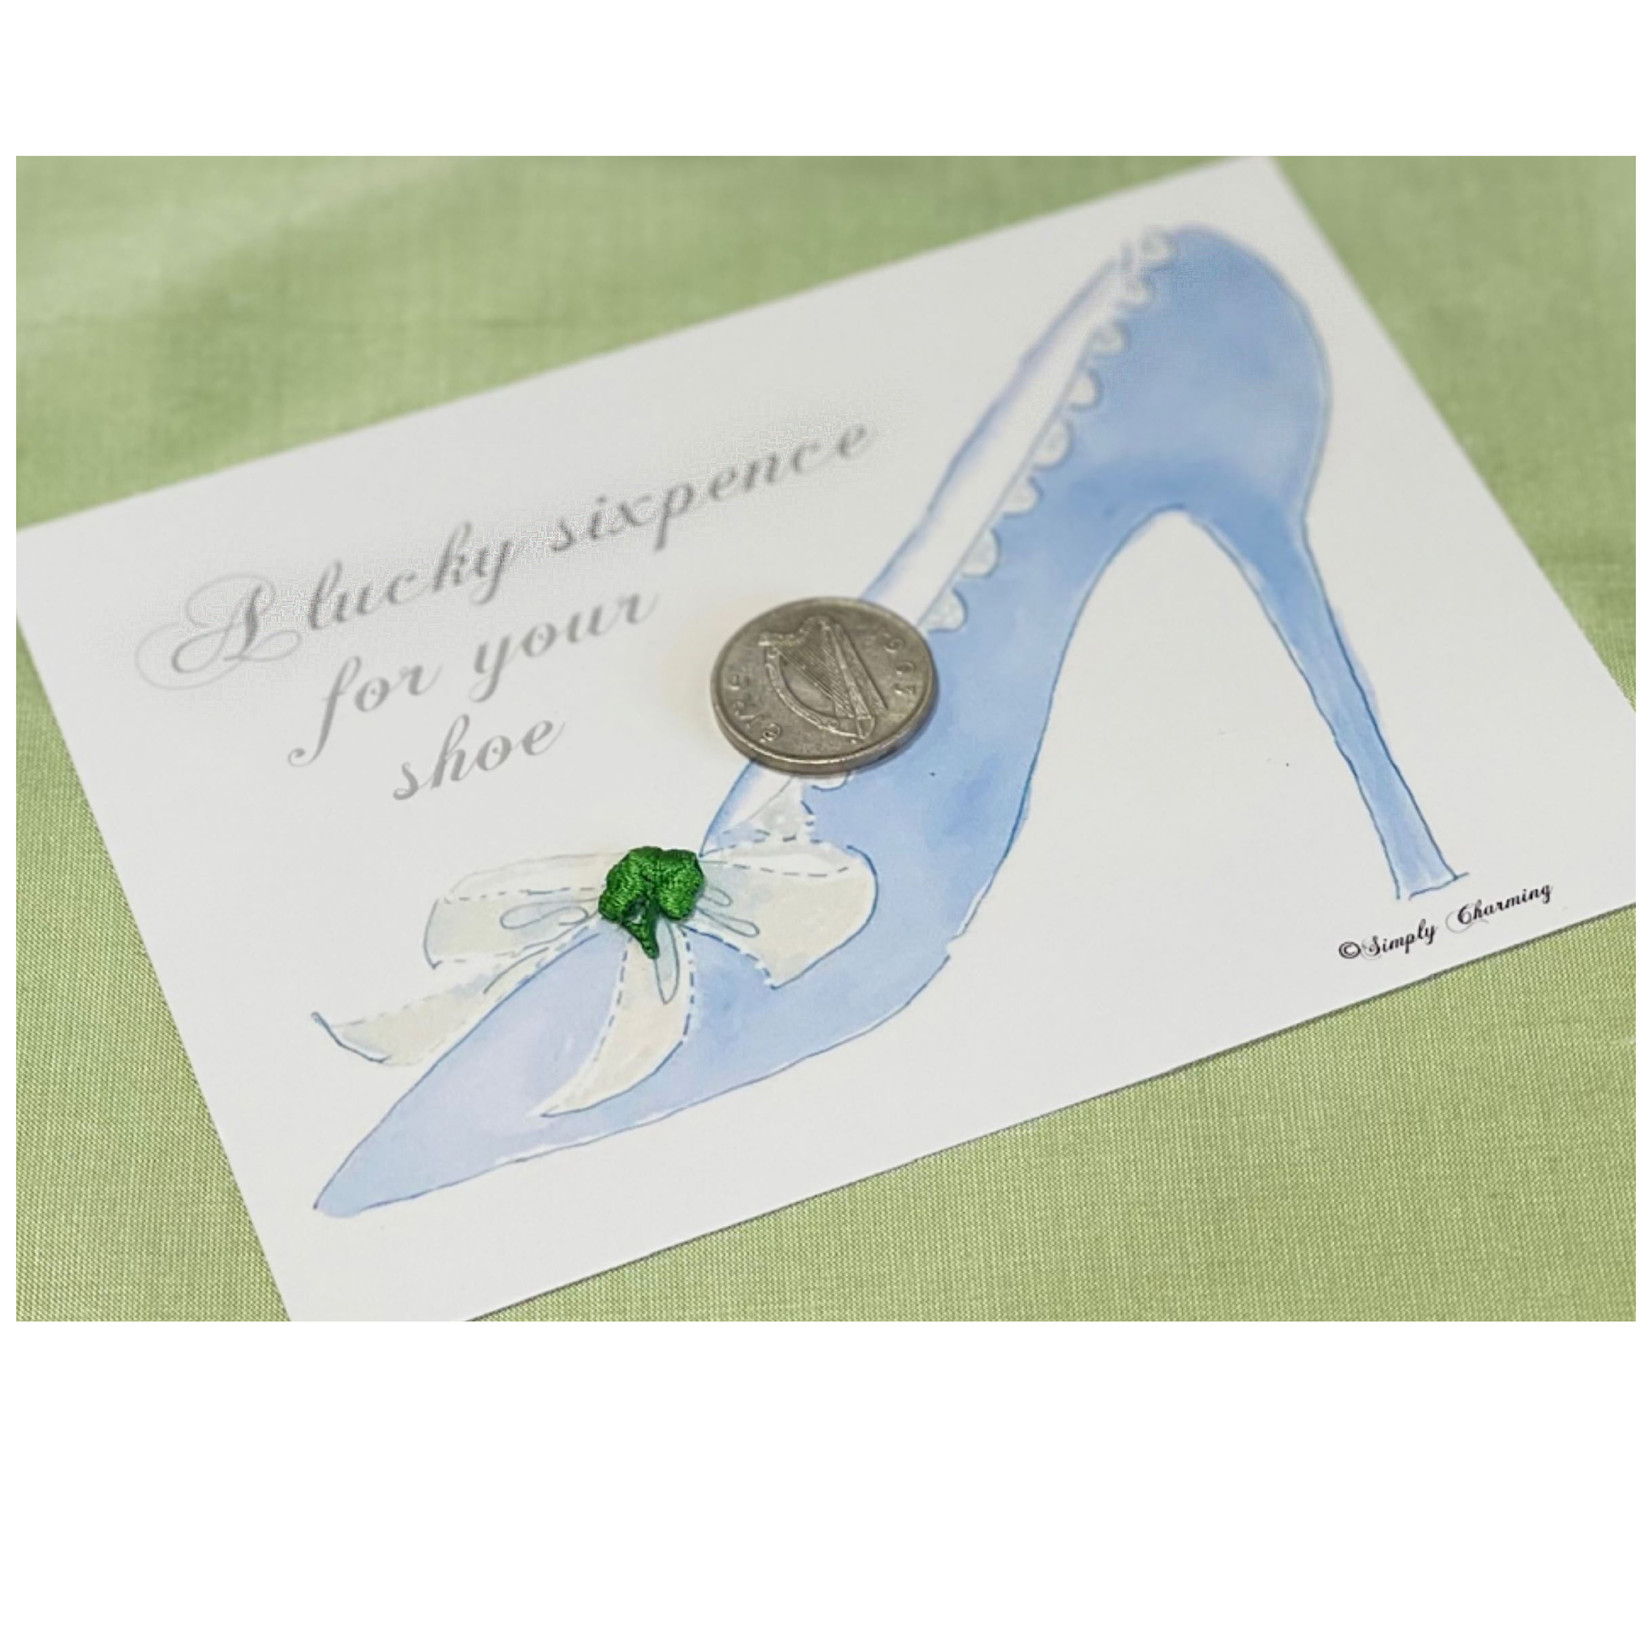 Simply Charming Wedding Card: 6 Pence for Bride